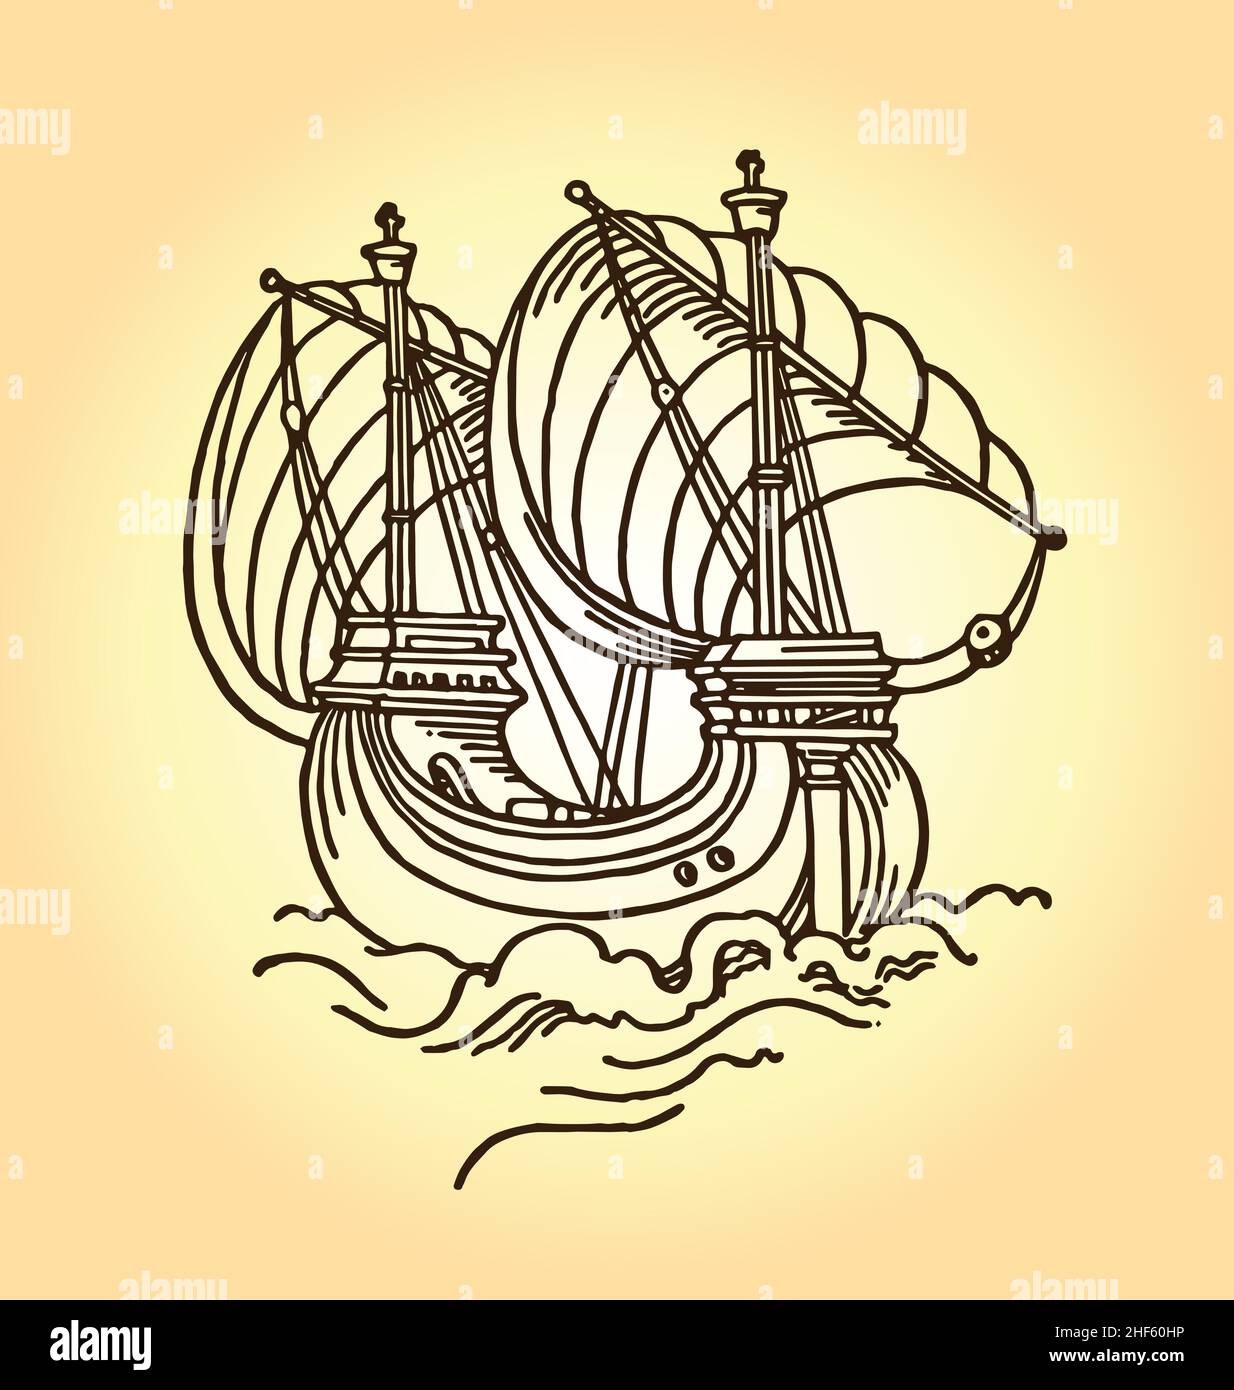 Vintage old ship line drawing vector illustration on sepia background Stock Vector